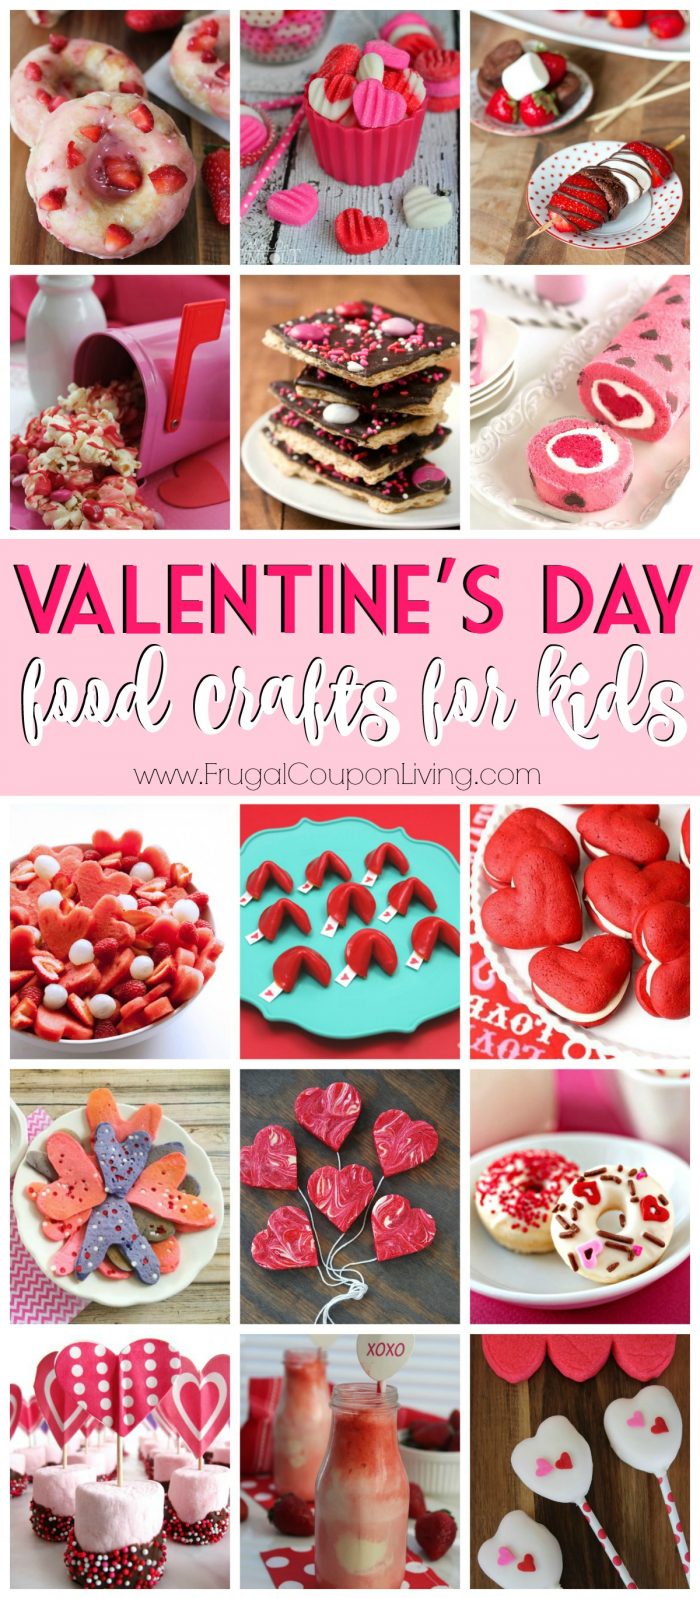 Valentines-Day-Food-Crafts-for-Kids-Frugal-Coupon-Living